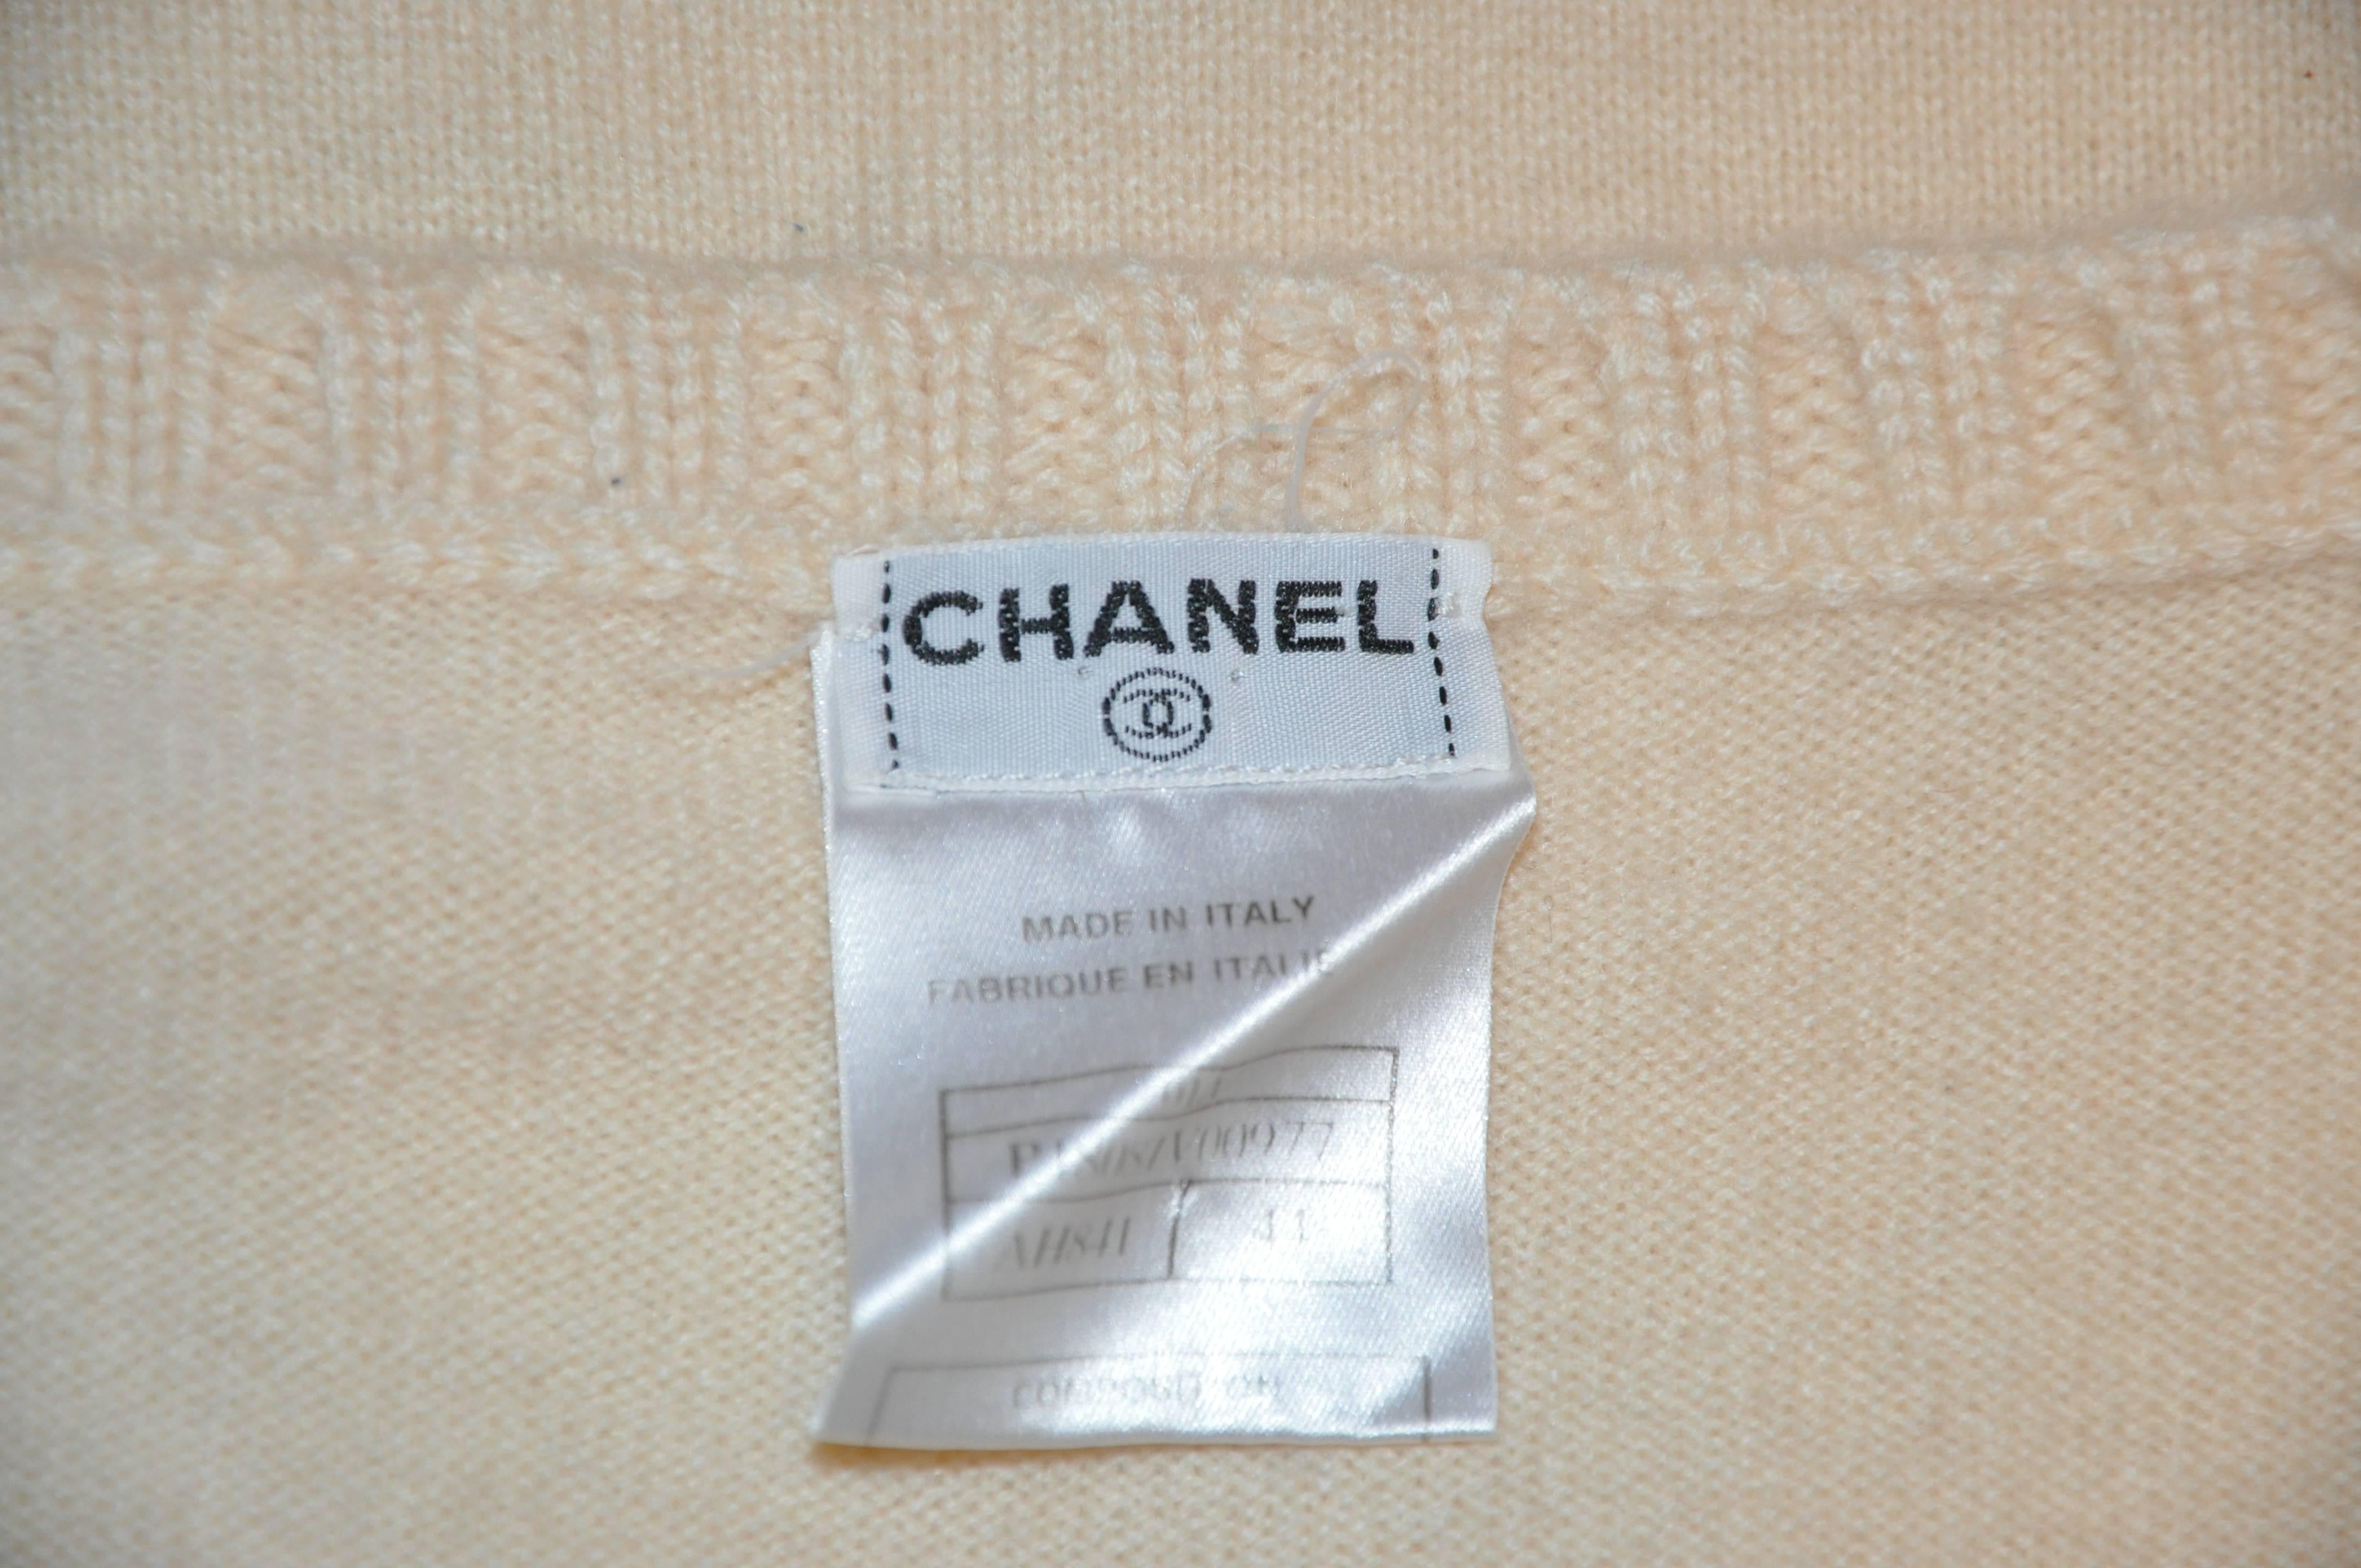        Chanel wonderfully timeless and elegant cream 2-ply cashmere crew neck pullover is accented with their signature name engraved on a 